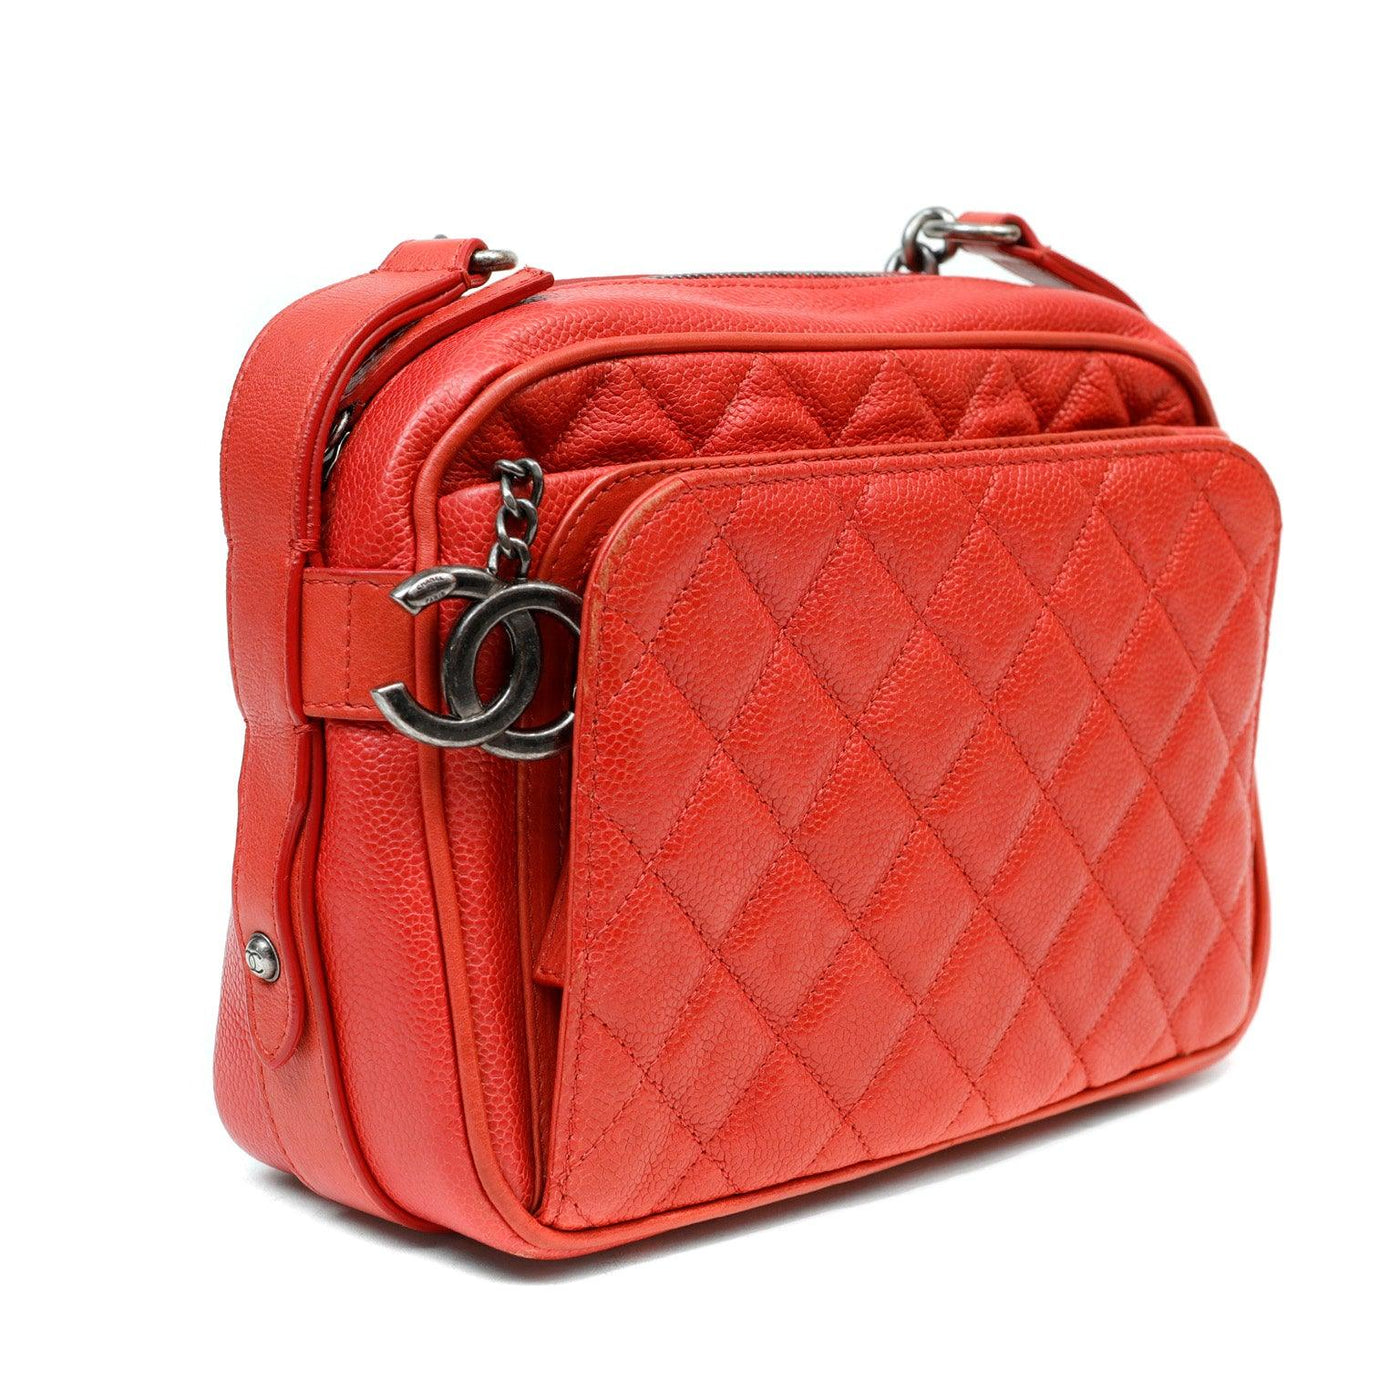 Chanel Red Caviar Leather Crossbody Bag - Only Authentics